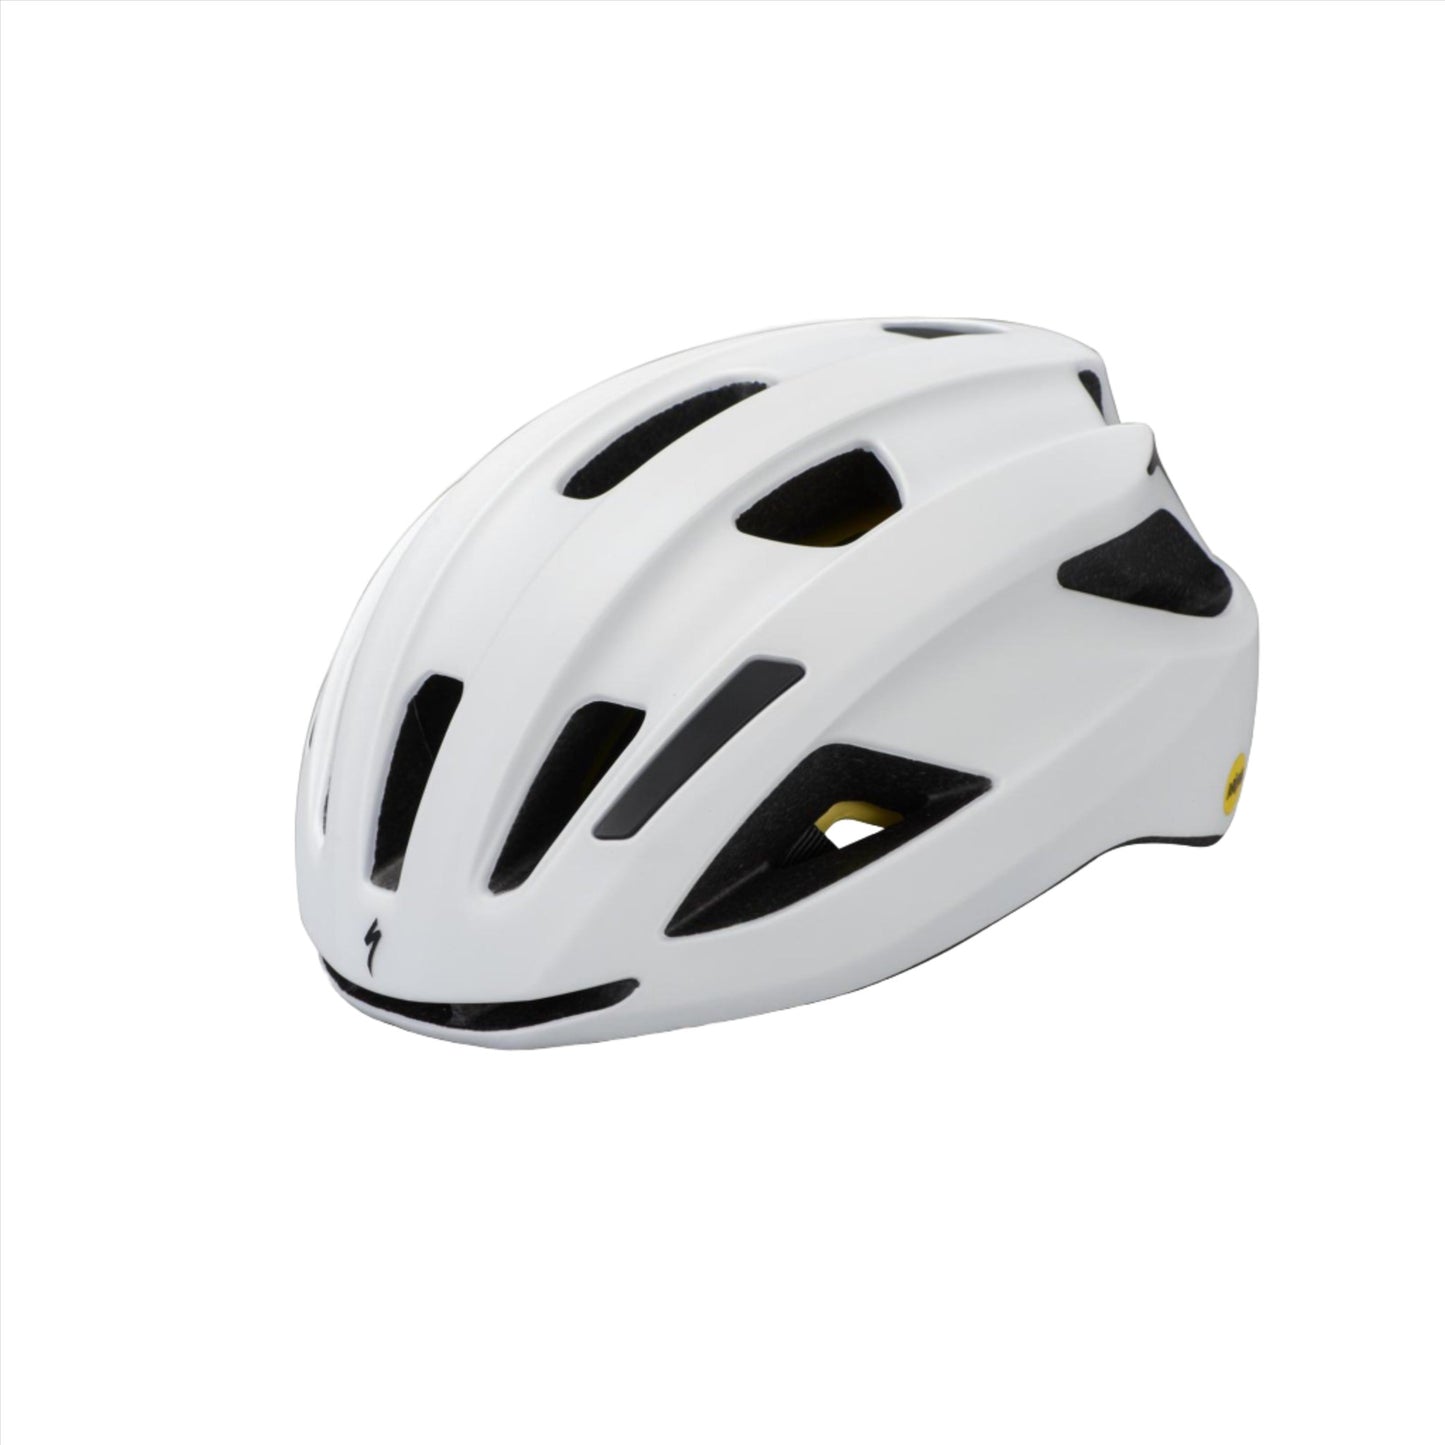 Align II | completecyclist - Clean aesthetic, comfortable fit, and a budget-friendly price—that’s what makes up the Align II. The standout feature of the Align II is the inclusion of the Multi-Directional Impact Protection System (MIPS)